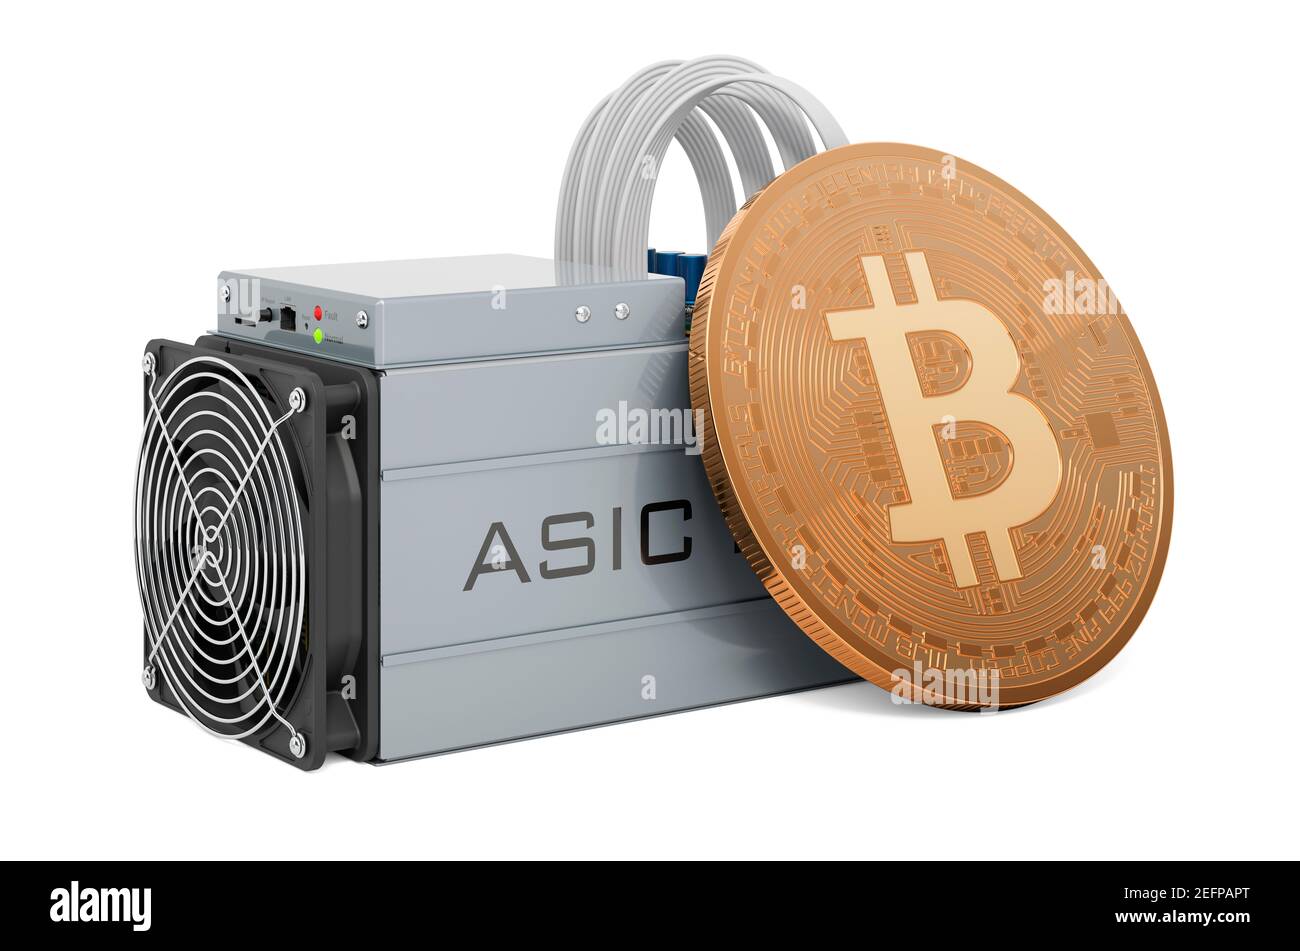 99 Usb Asic Bitcoin Miner Images, Stock Photos, 3D objects